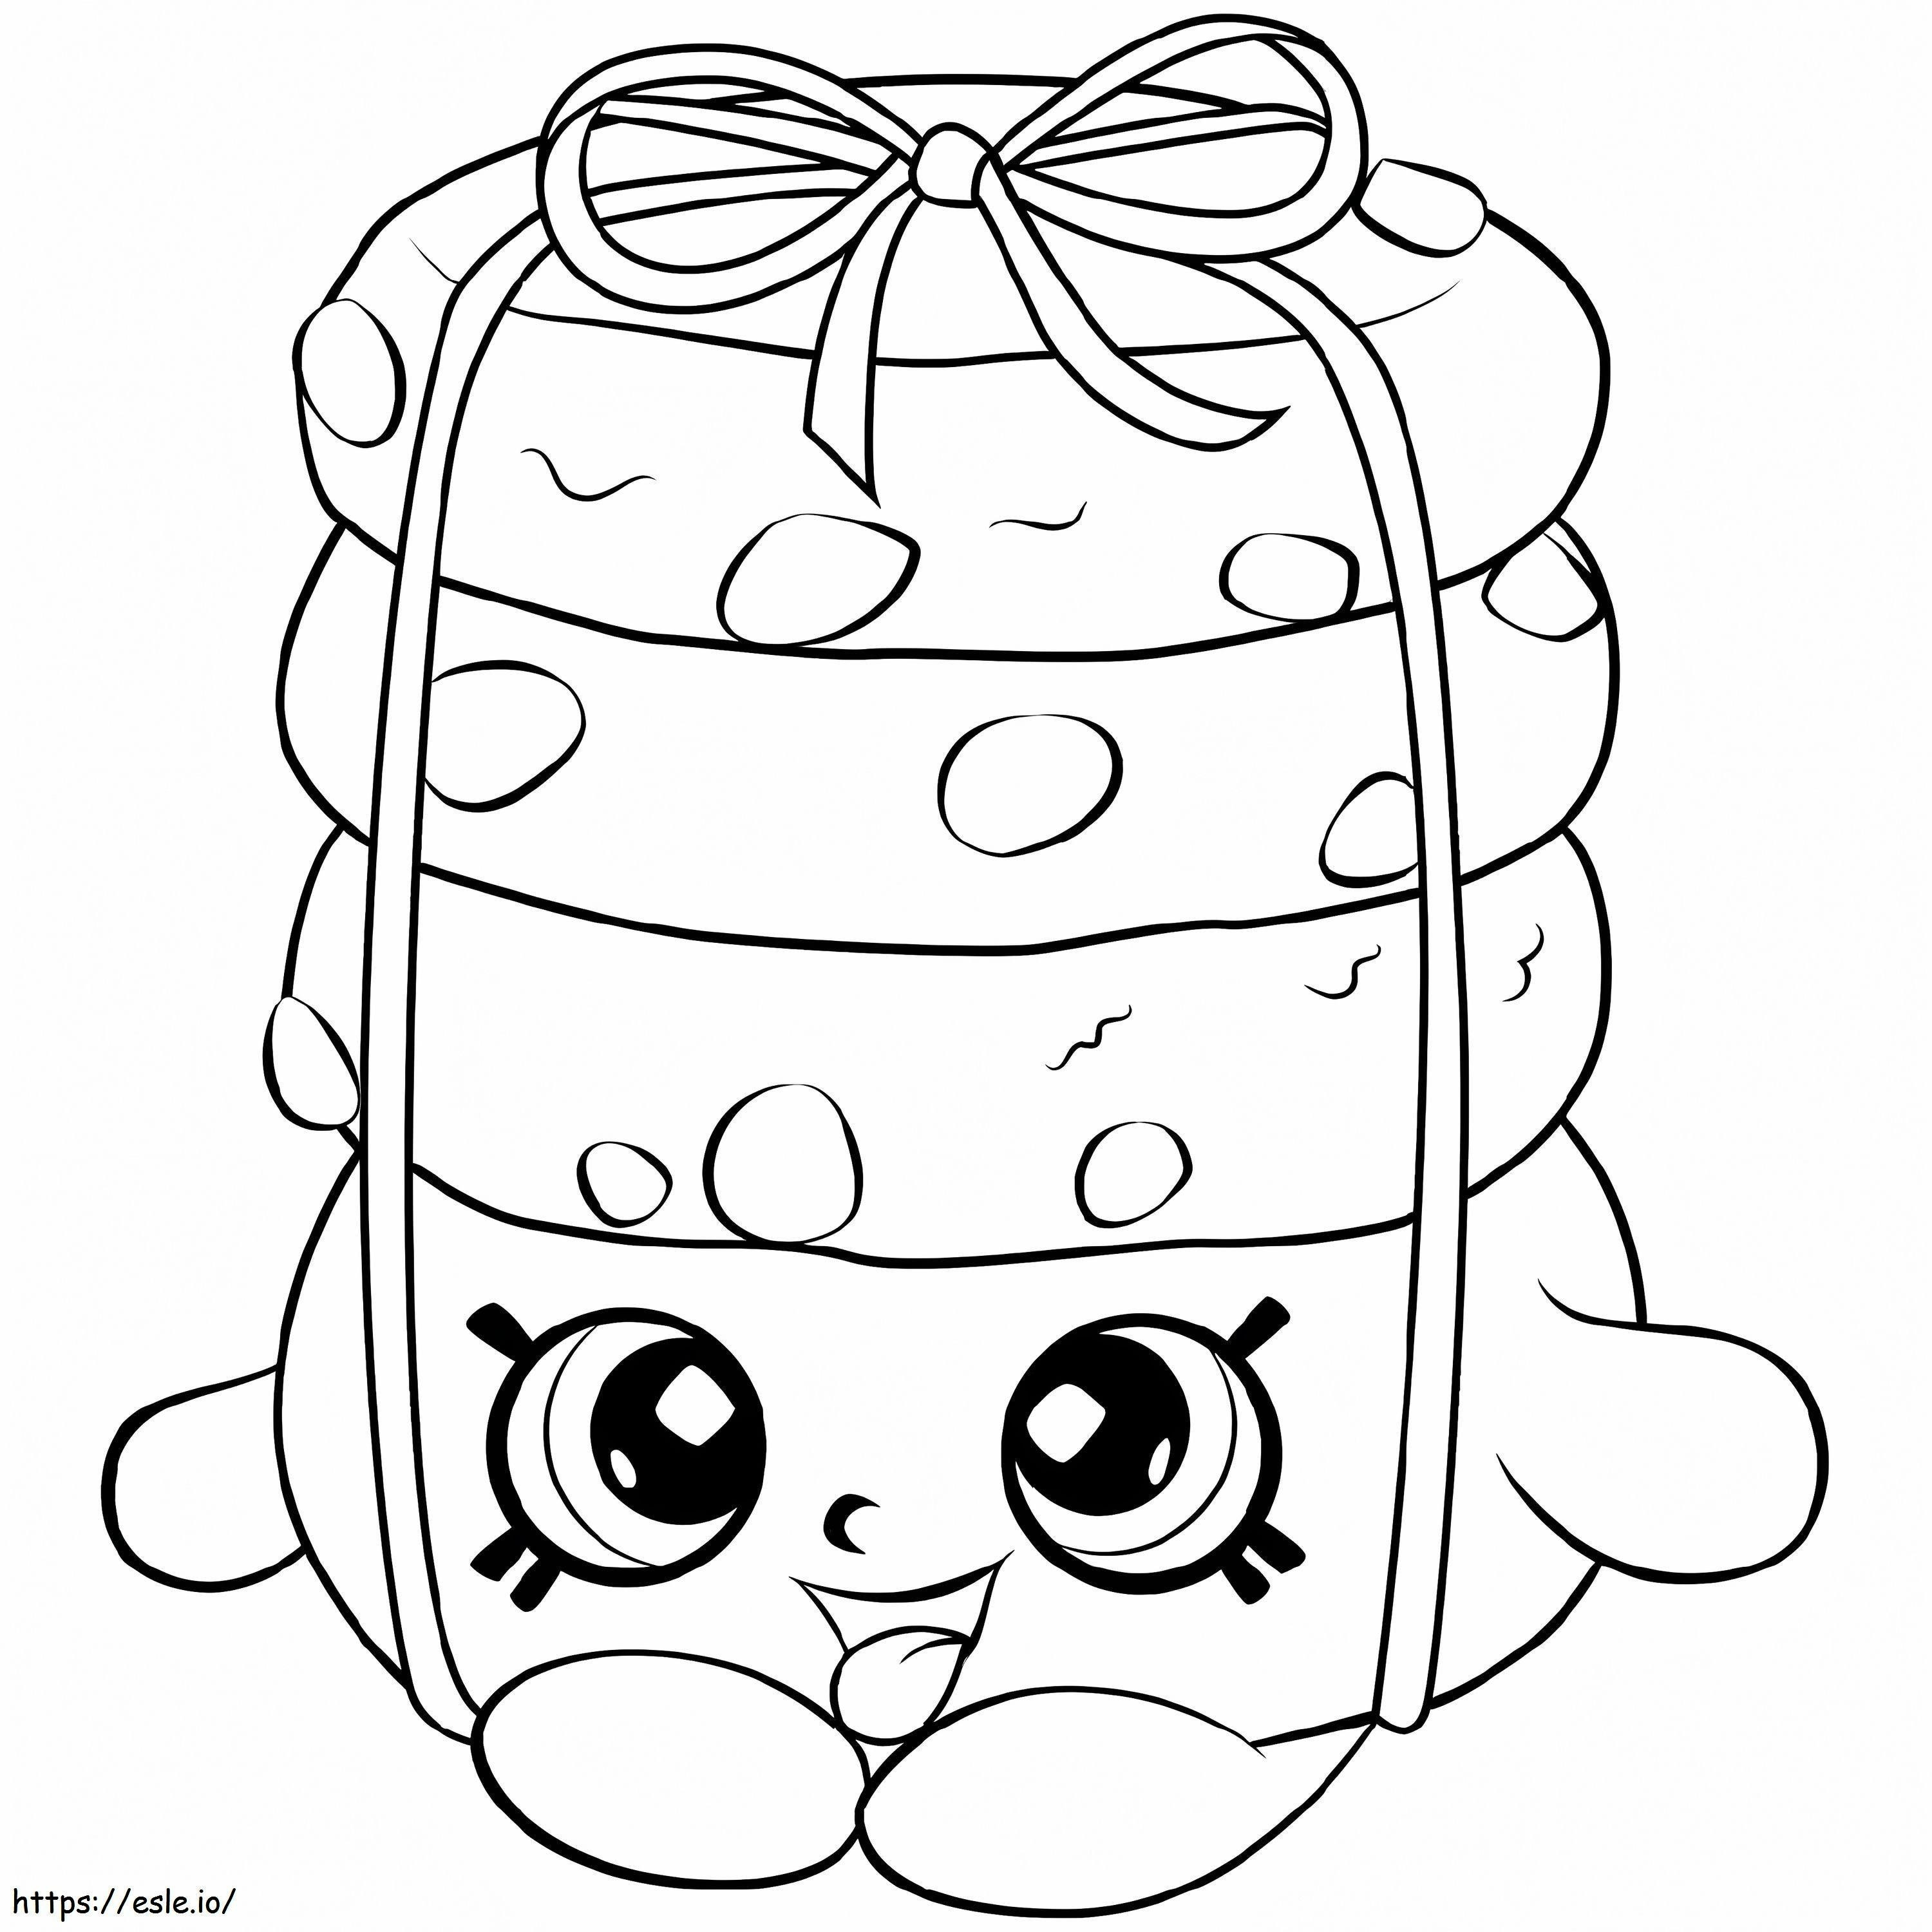 Shopkin Cookie Stacks coloring page